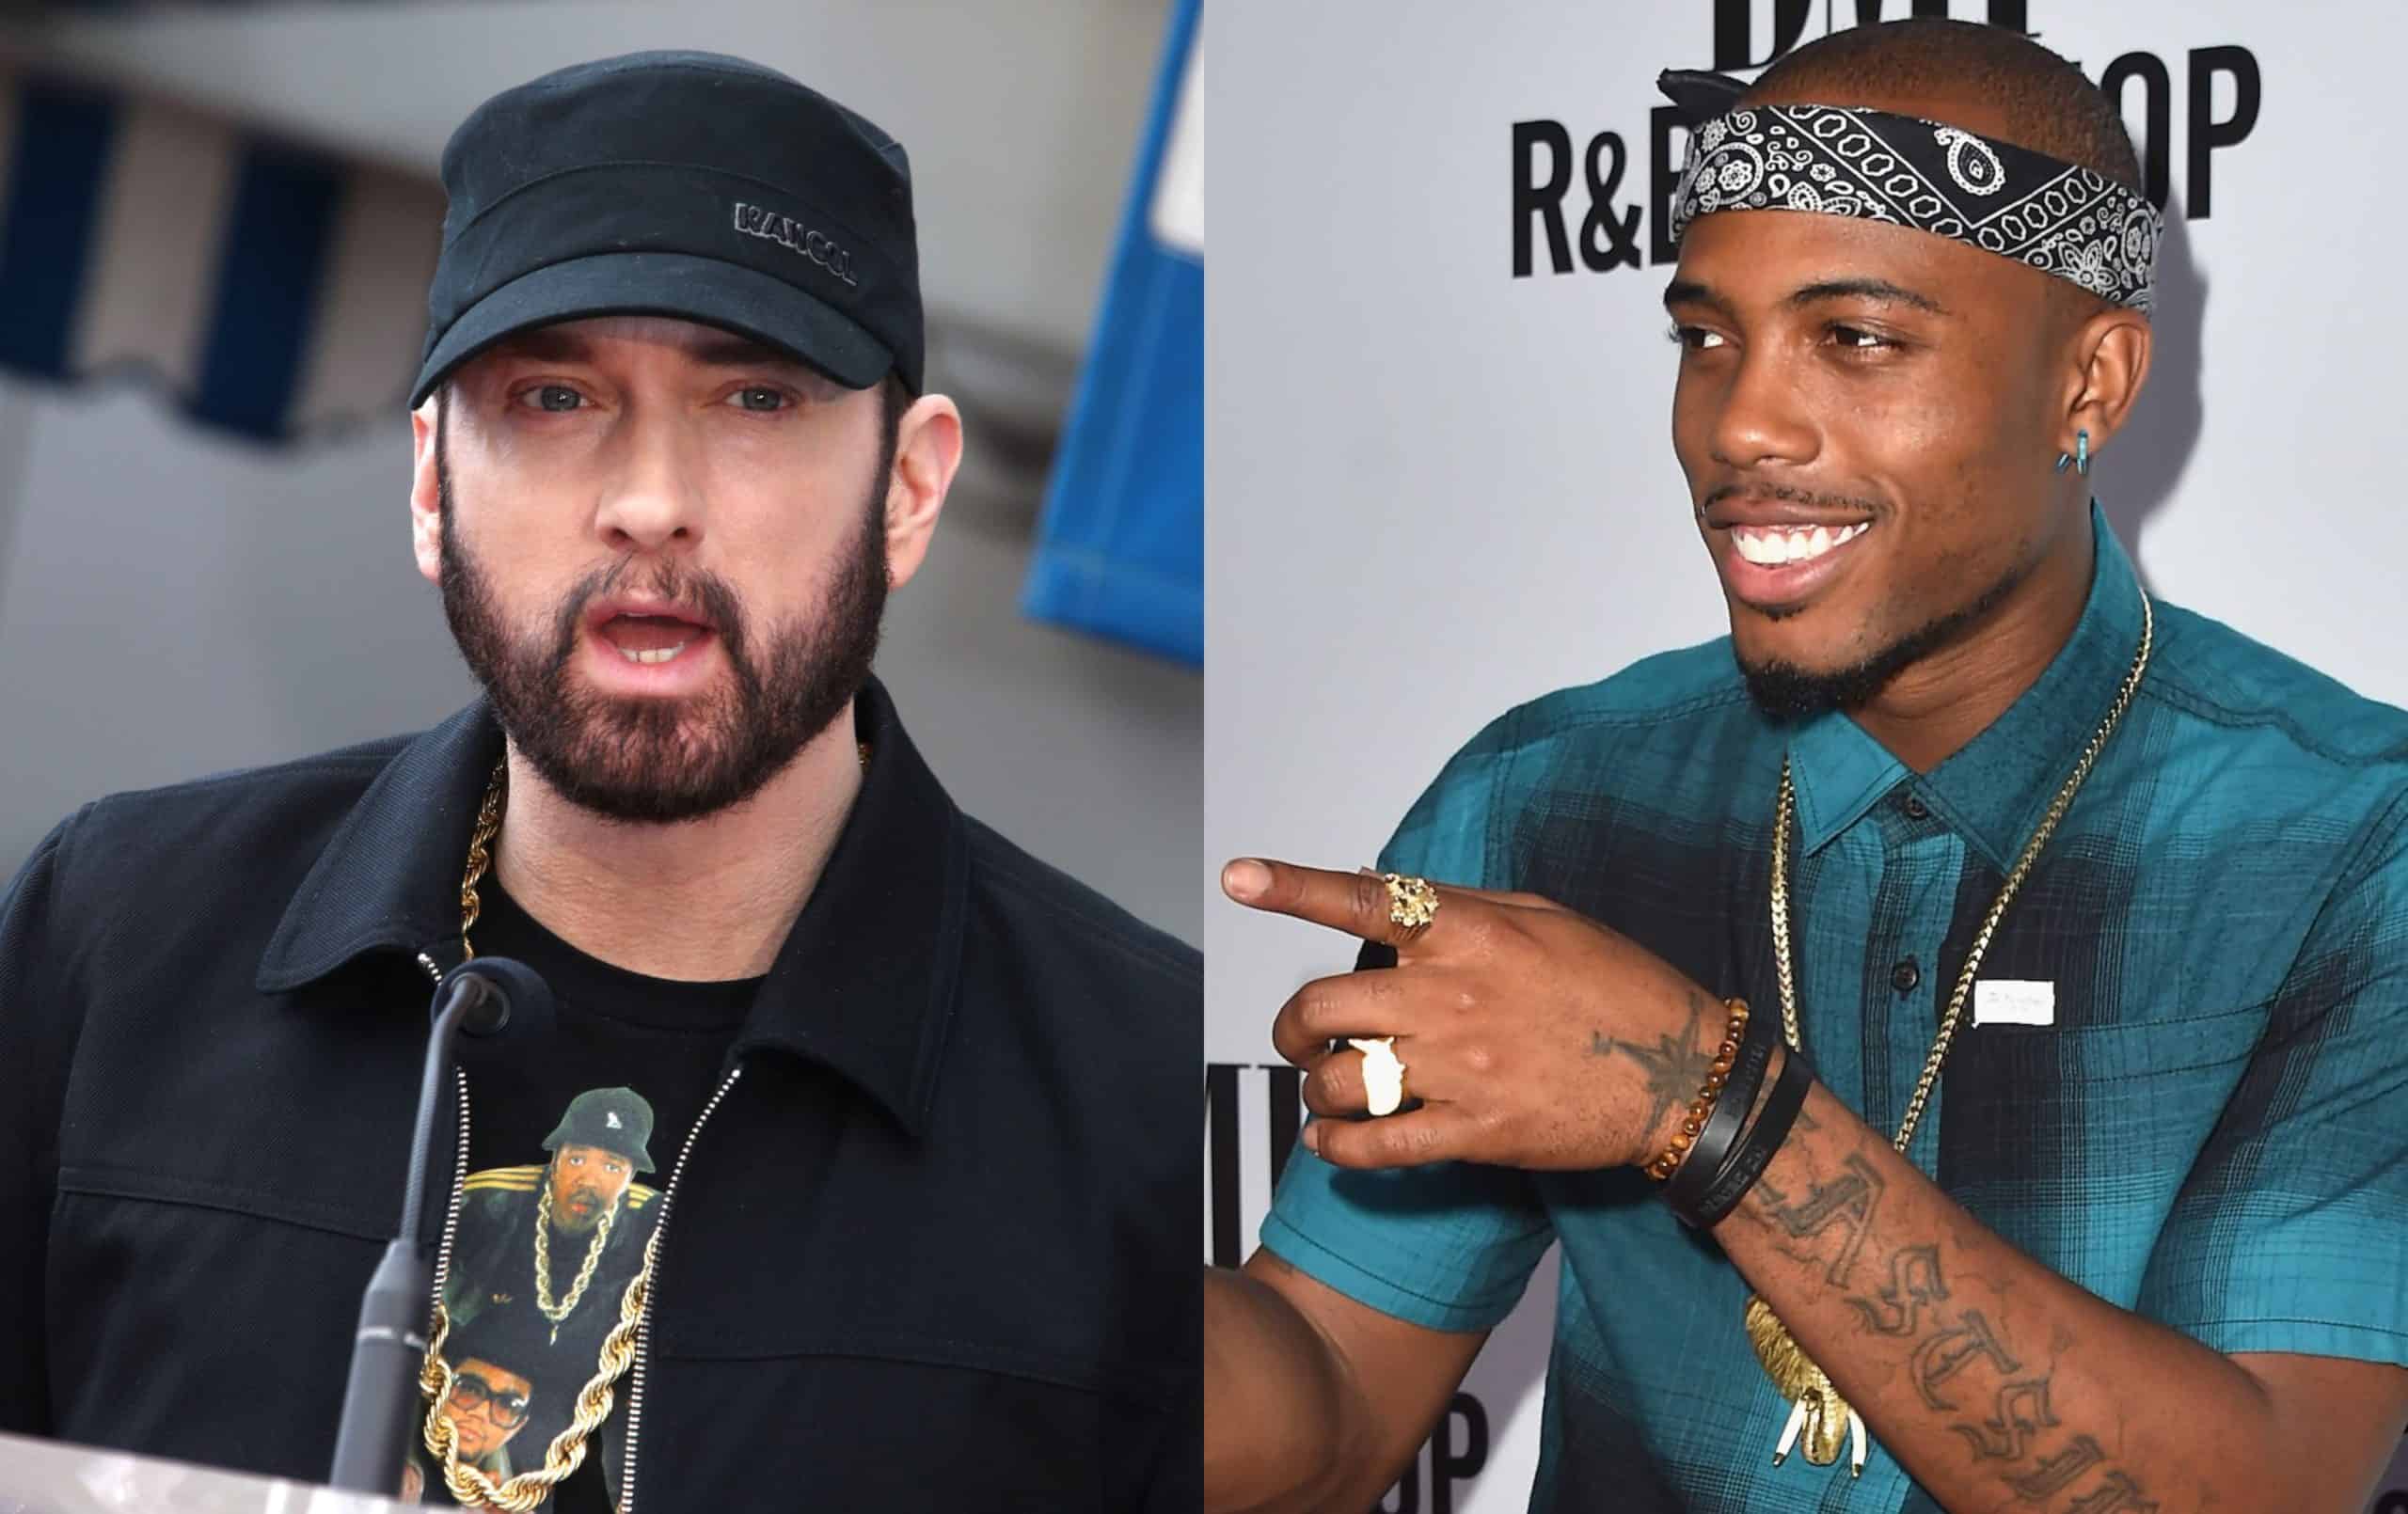 B.o.B Reveals Eminem Was Supposed To Be On The Original Version Of Airplanes